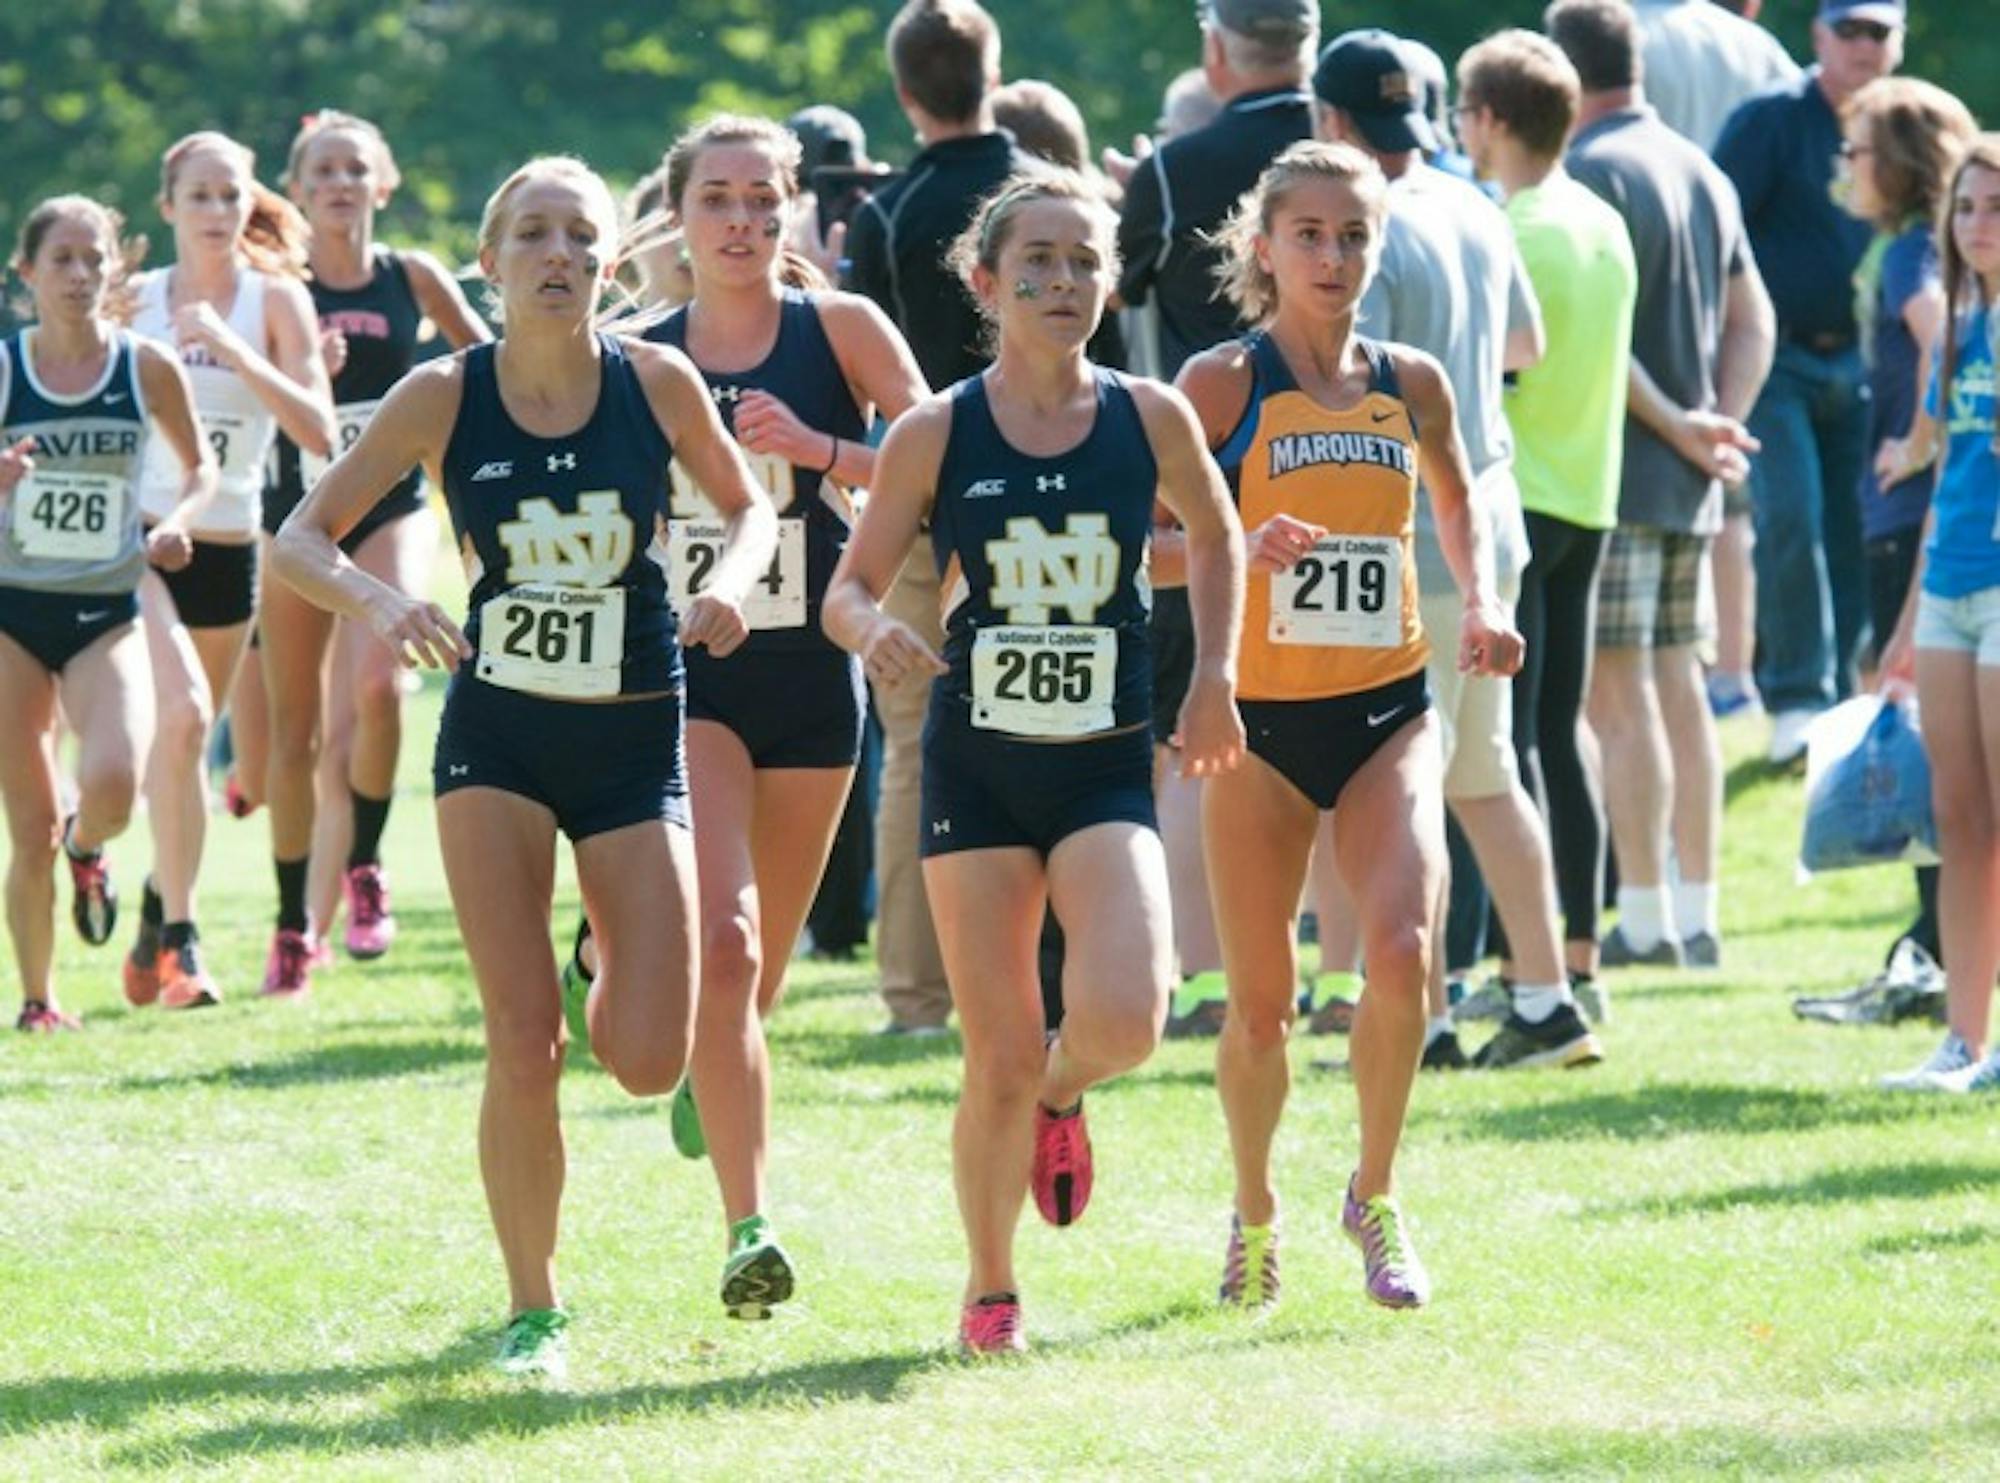 Senior Molly Seidel leads the pack before finishing first at the National Catholic Championships on Sept. 19, 2014. Senior Danielle Aragon finished second, and the Irish won the team title outright.